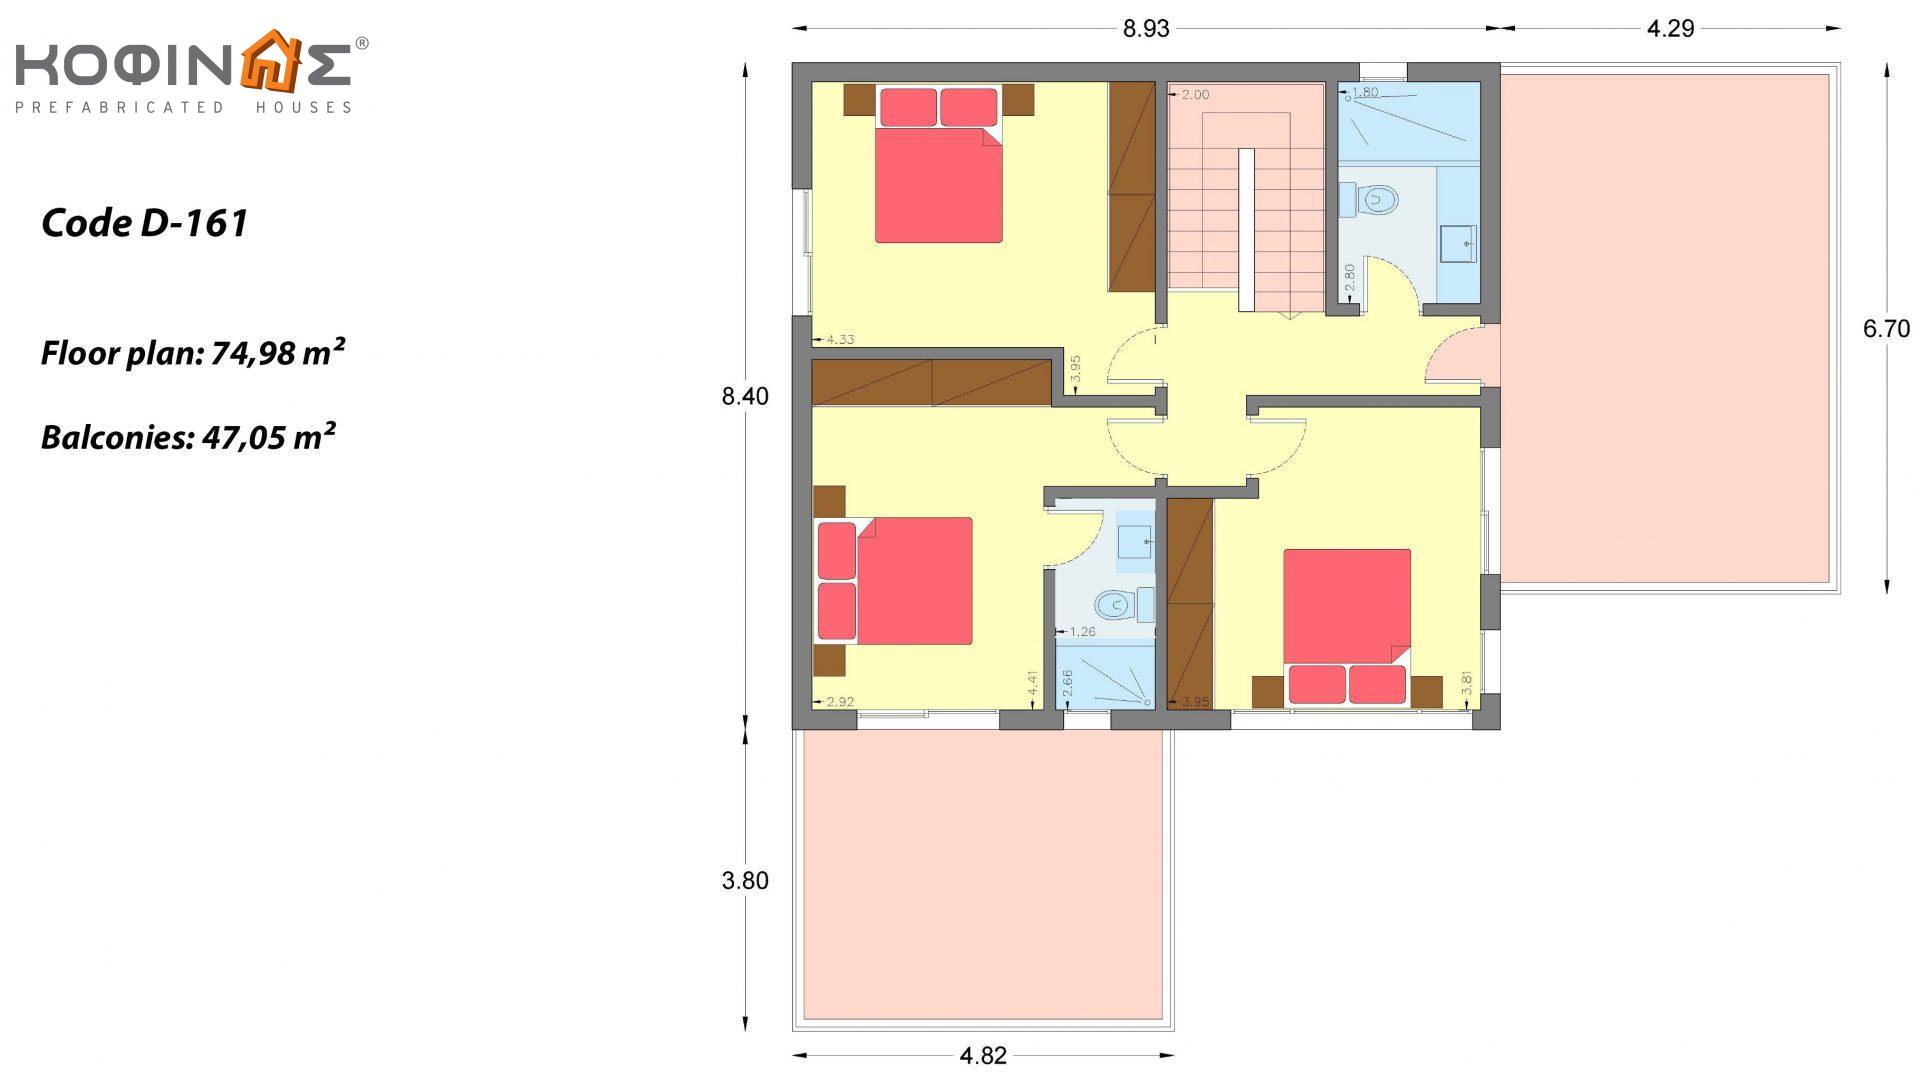 2-story house D-161, with a total area of 161.27 sq.m., +Garage 28.74 m²(=190.01 m²),covered roofed areas 6.04 m²,balconies 47.05 m²